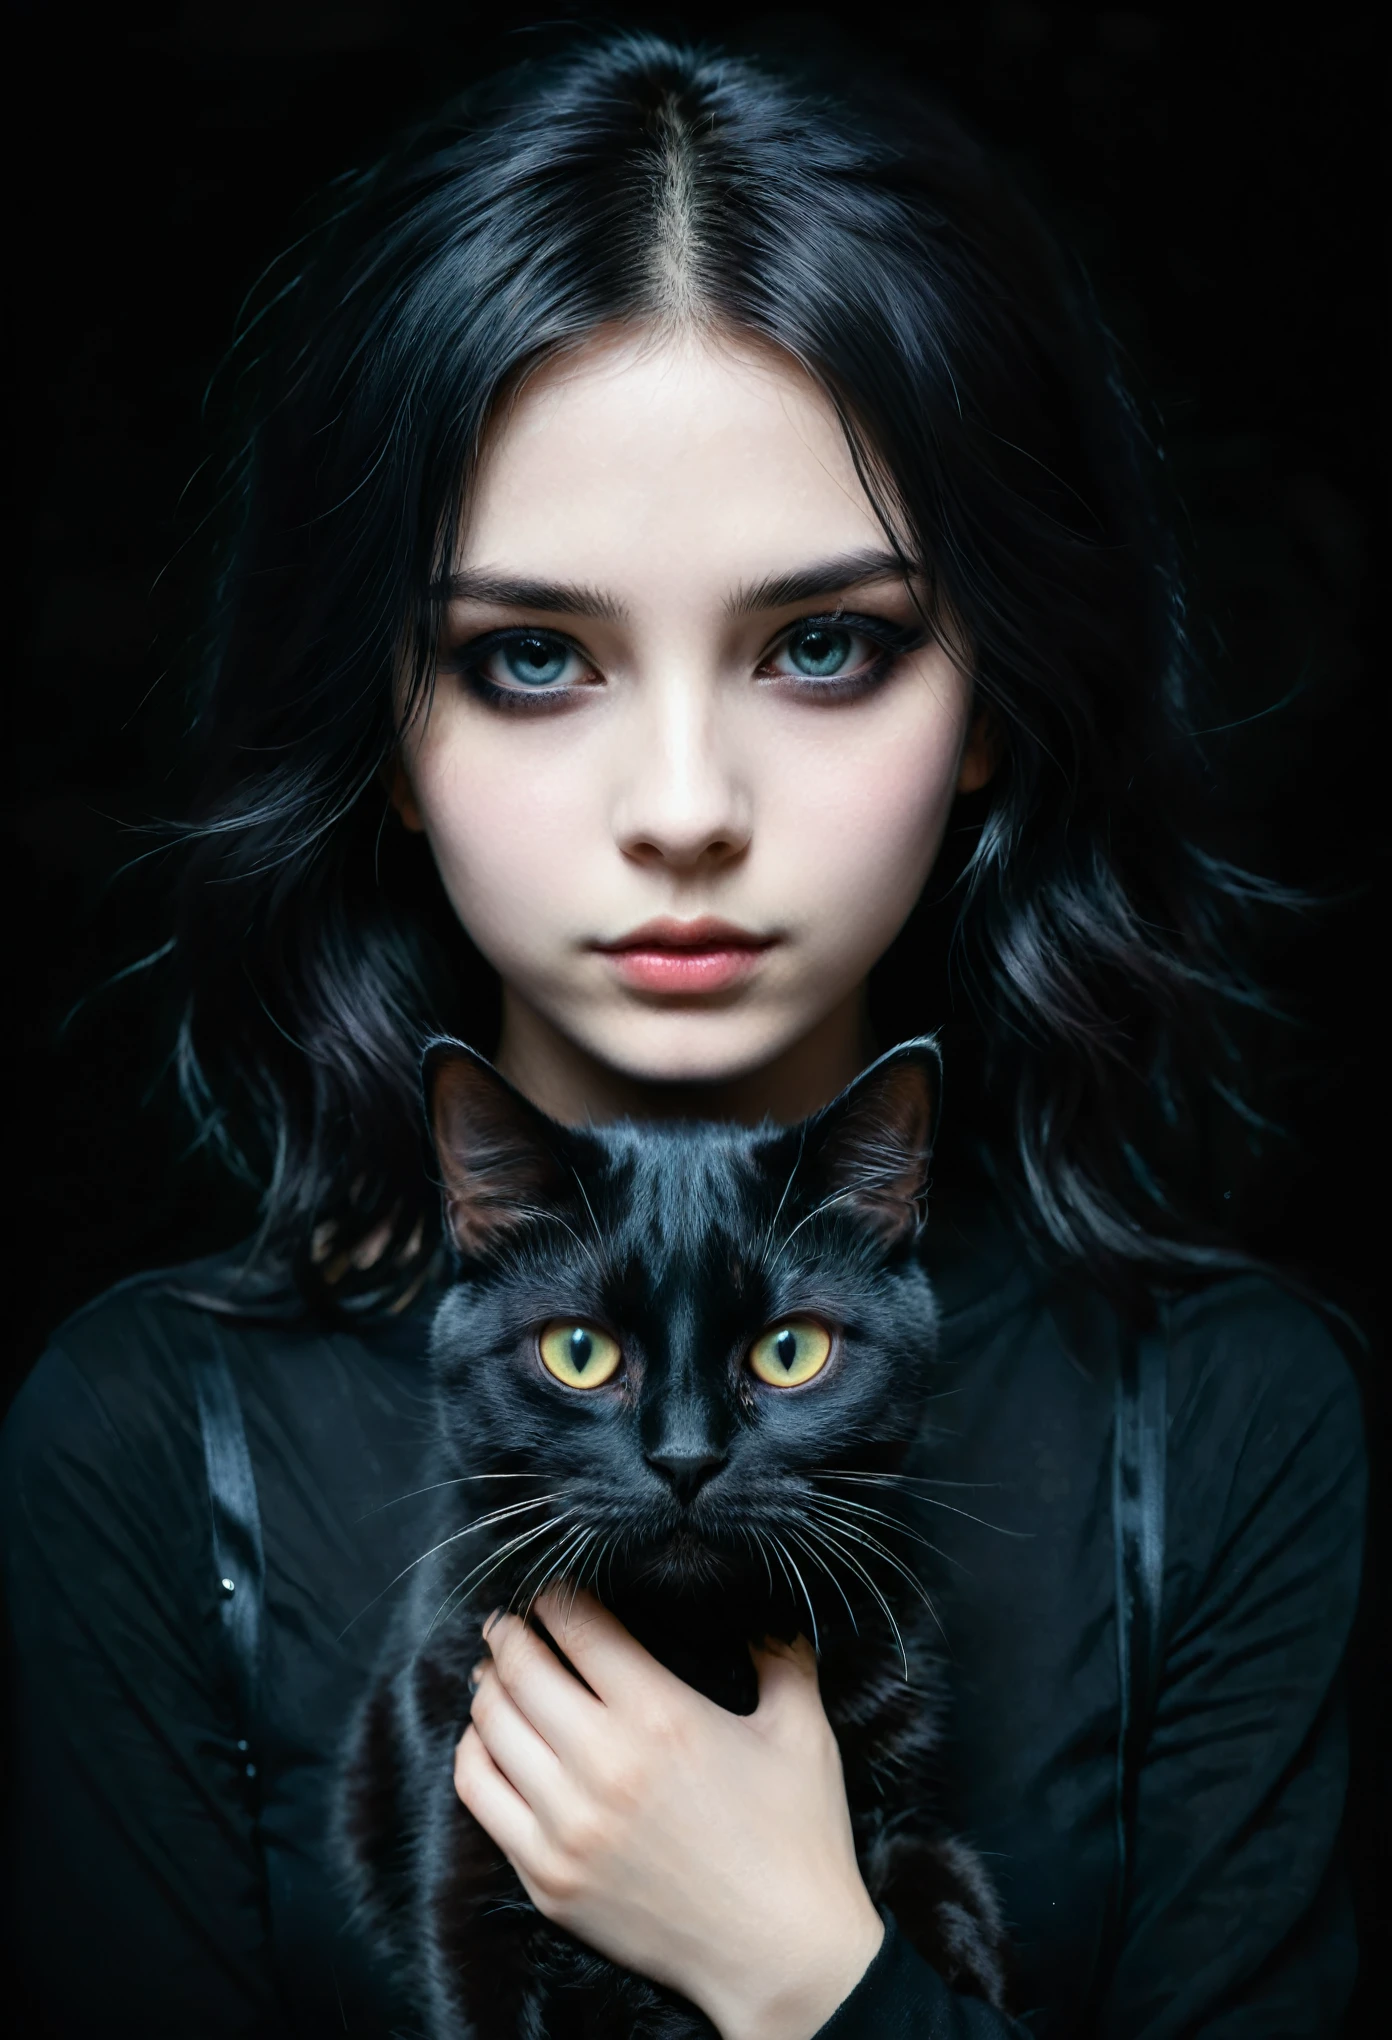 a emo girl with a black cat in her hands, detailed face, dark makeup, emotional expression, black clothing, dark background, chiaroscuro lighting, cinematic, dramatic, moody, digital painting